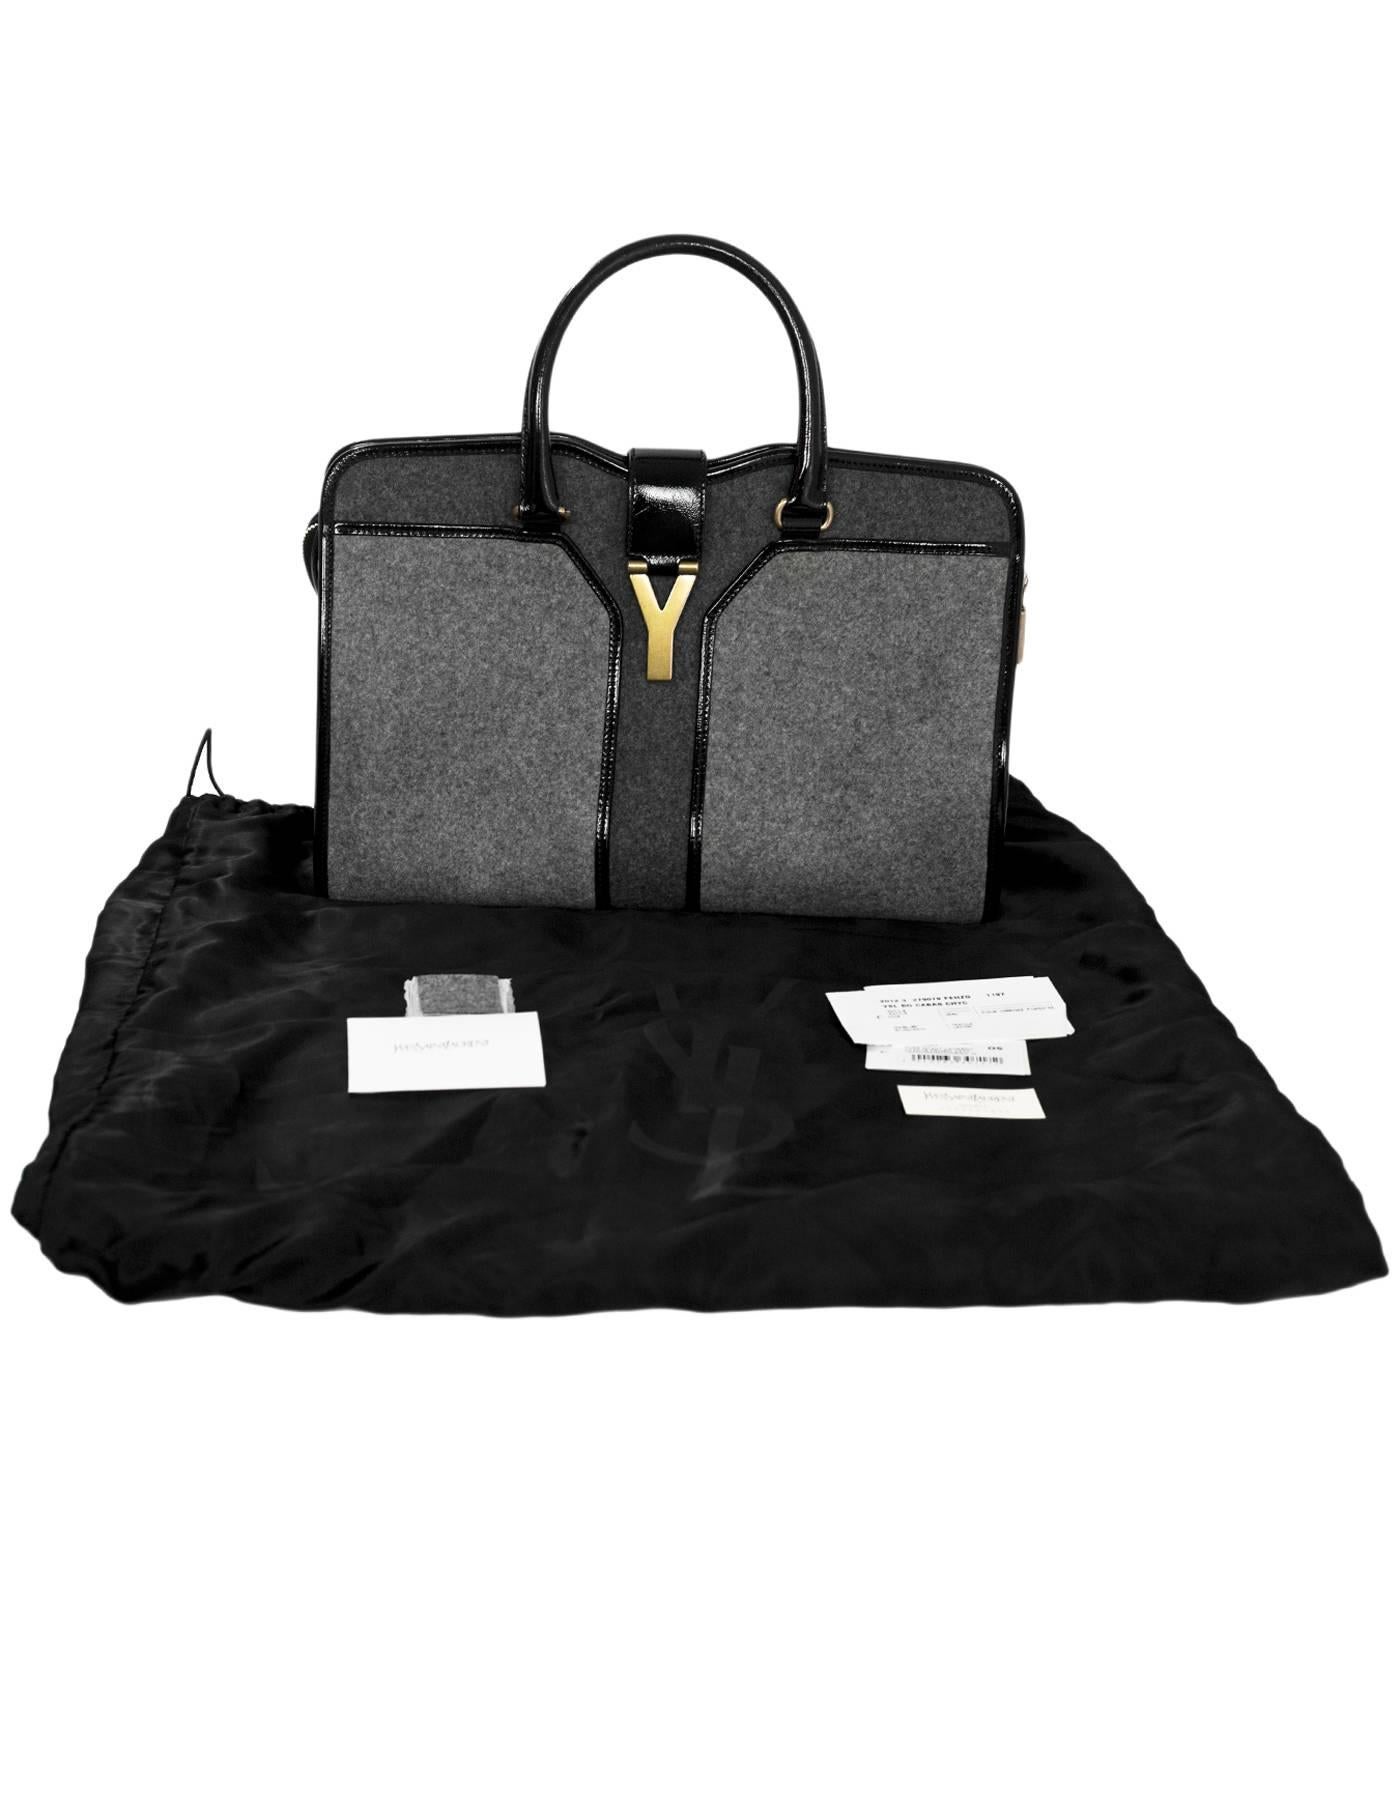 Yves Saint Laurent Cabas ChYc Medium Flannel and Patent Leather Tote Bag 1